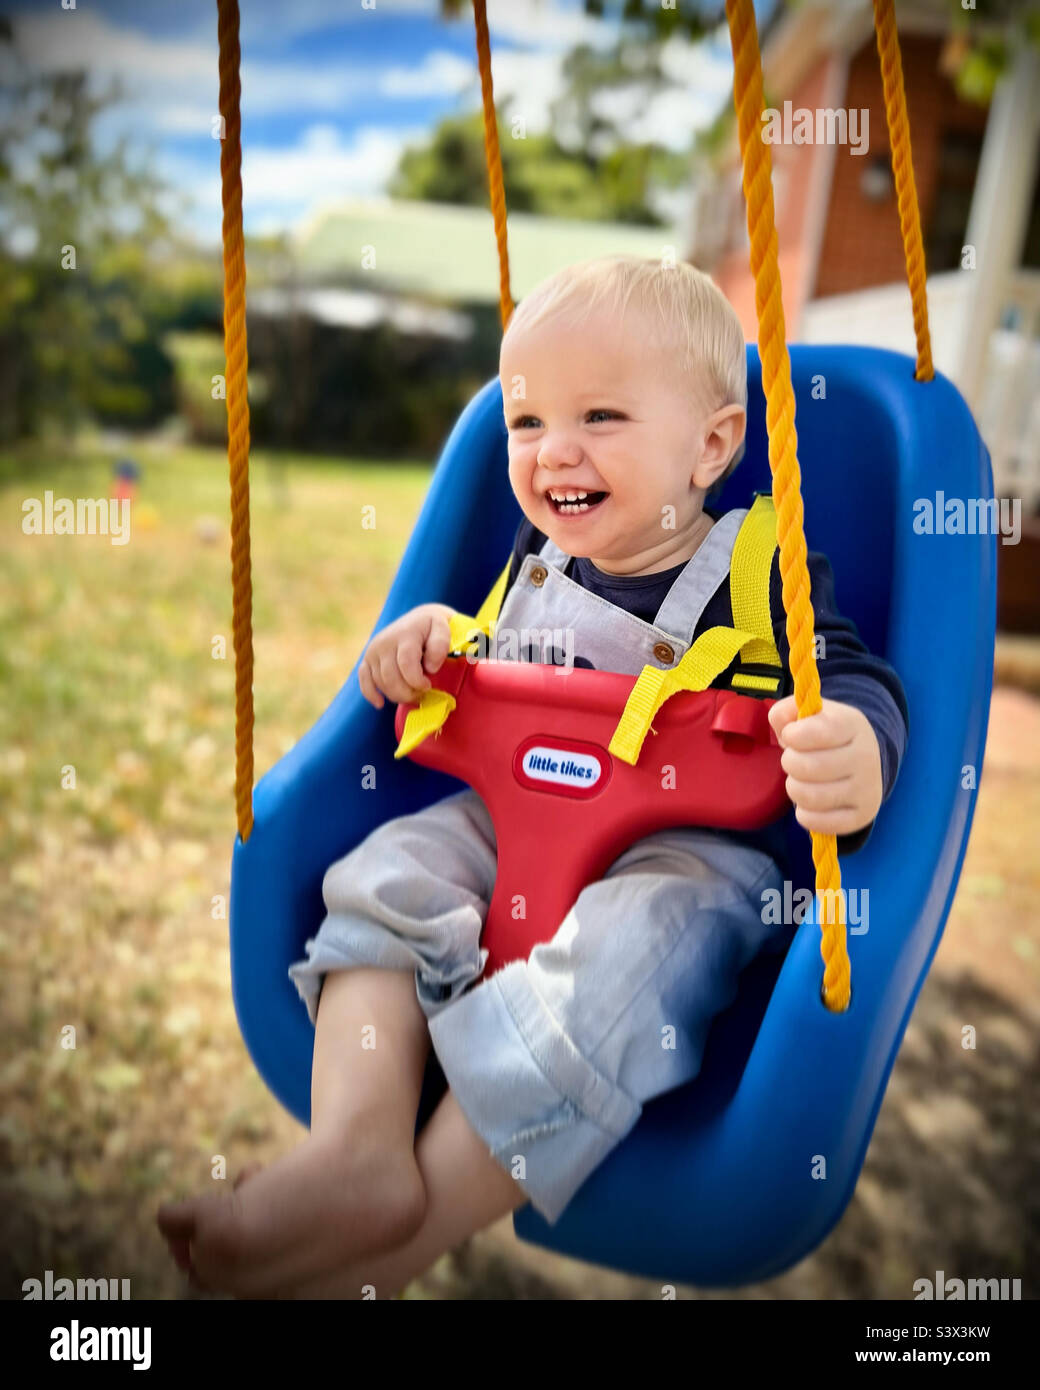 Baby swinging with big toothy grin Stock Photo